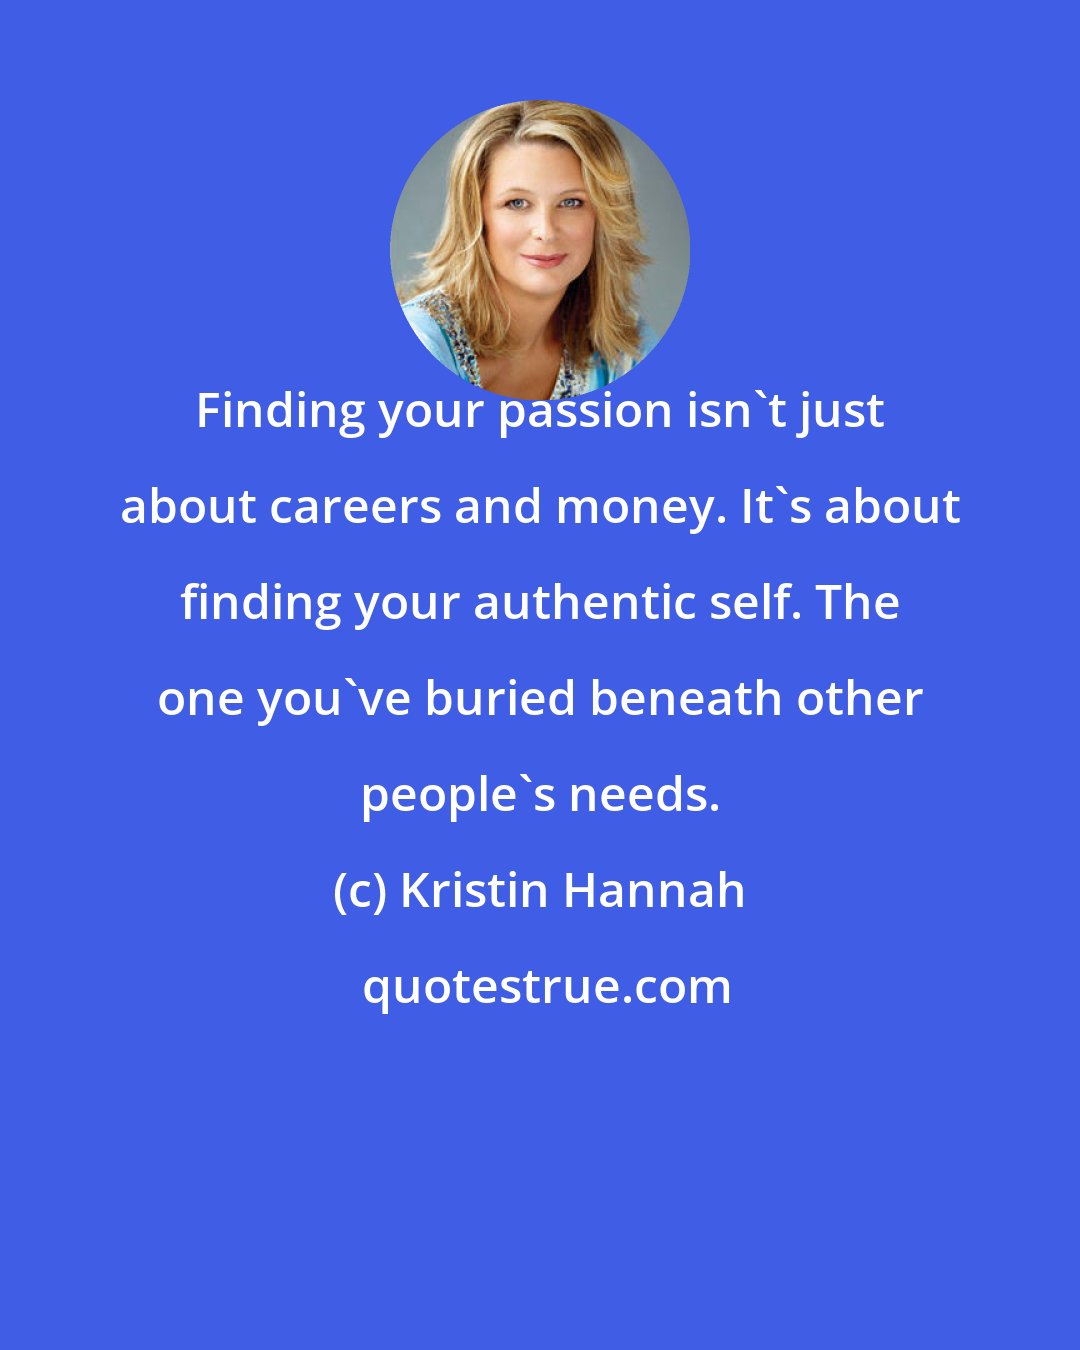 Kristin Hannah: Finding your passion isn't just about careers and money. It's about finding your authentic self. The one you've buried beneath other people's needs.